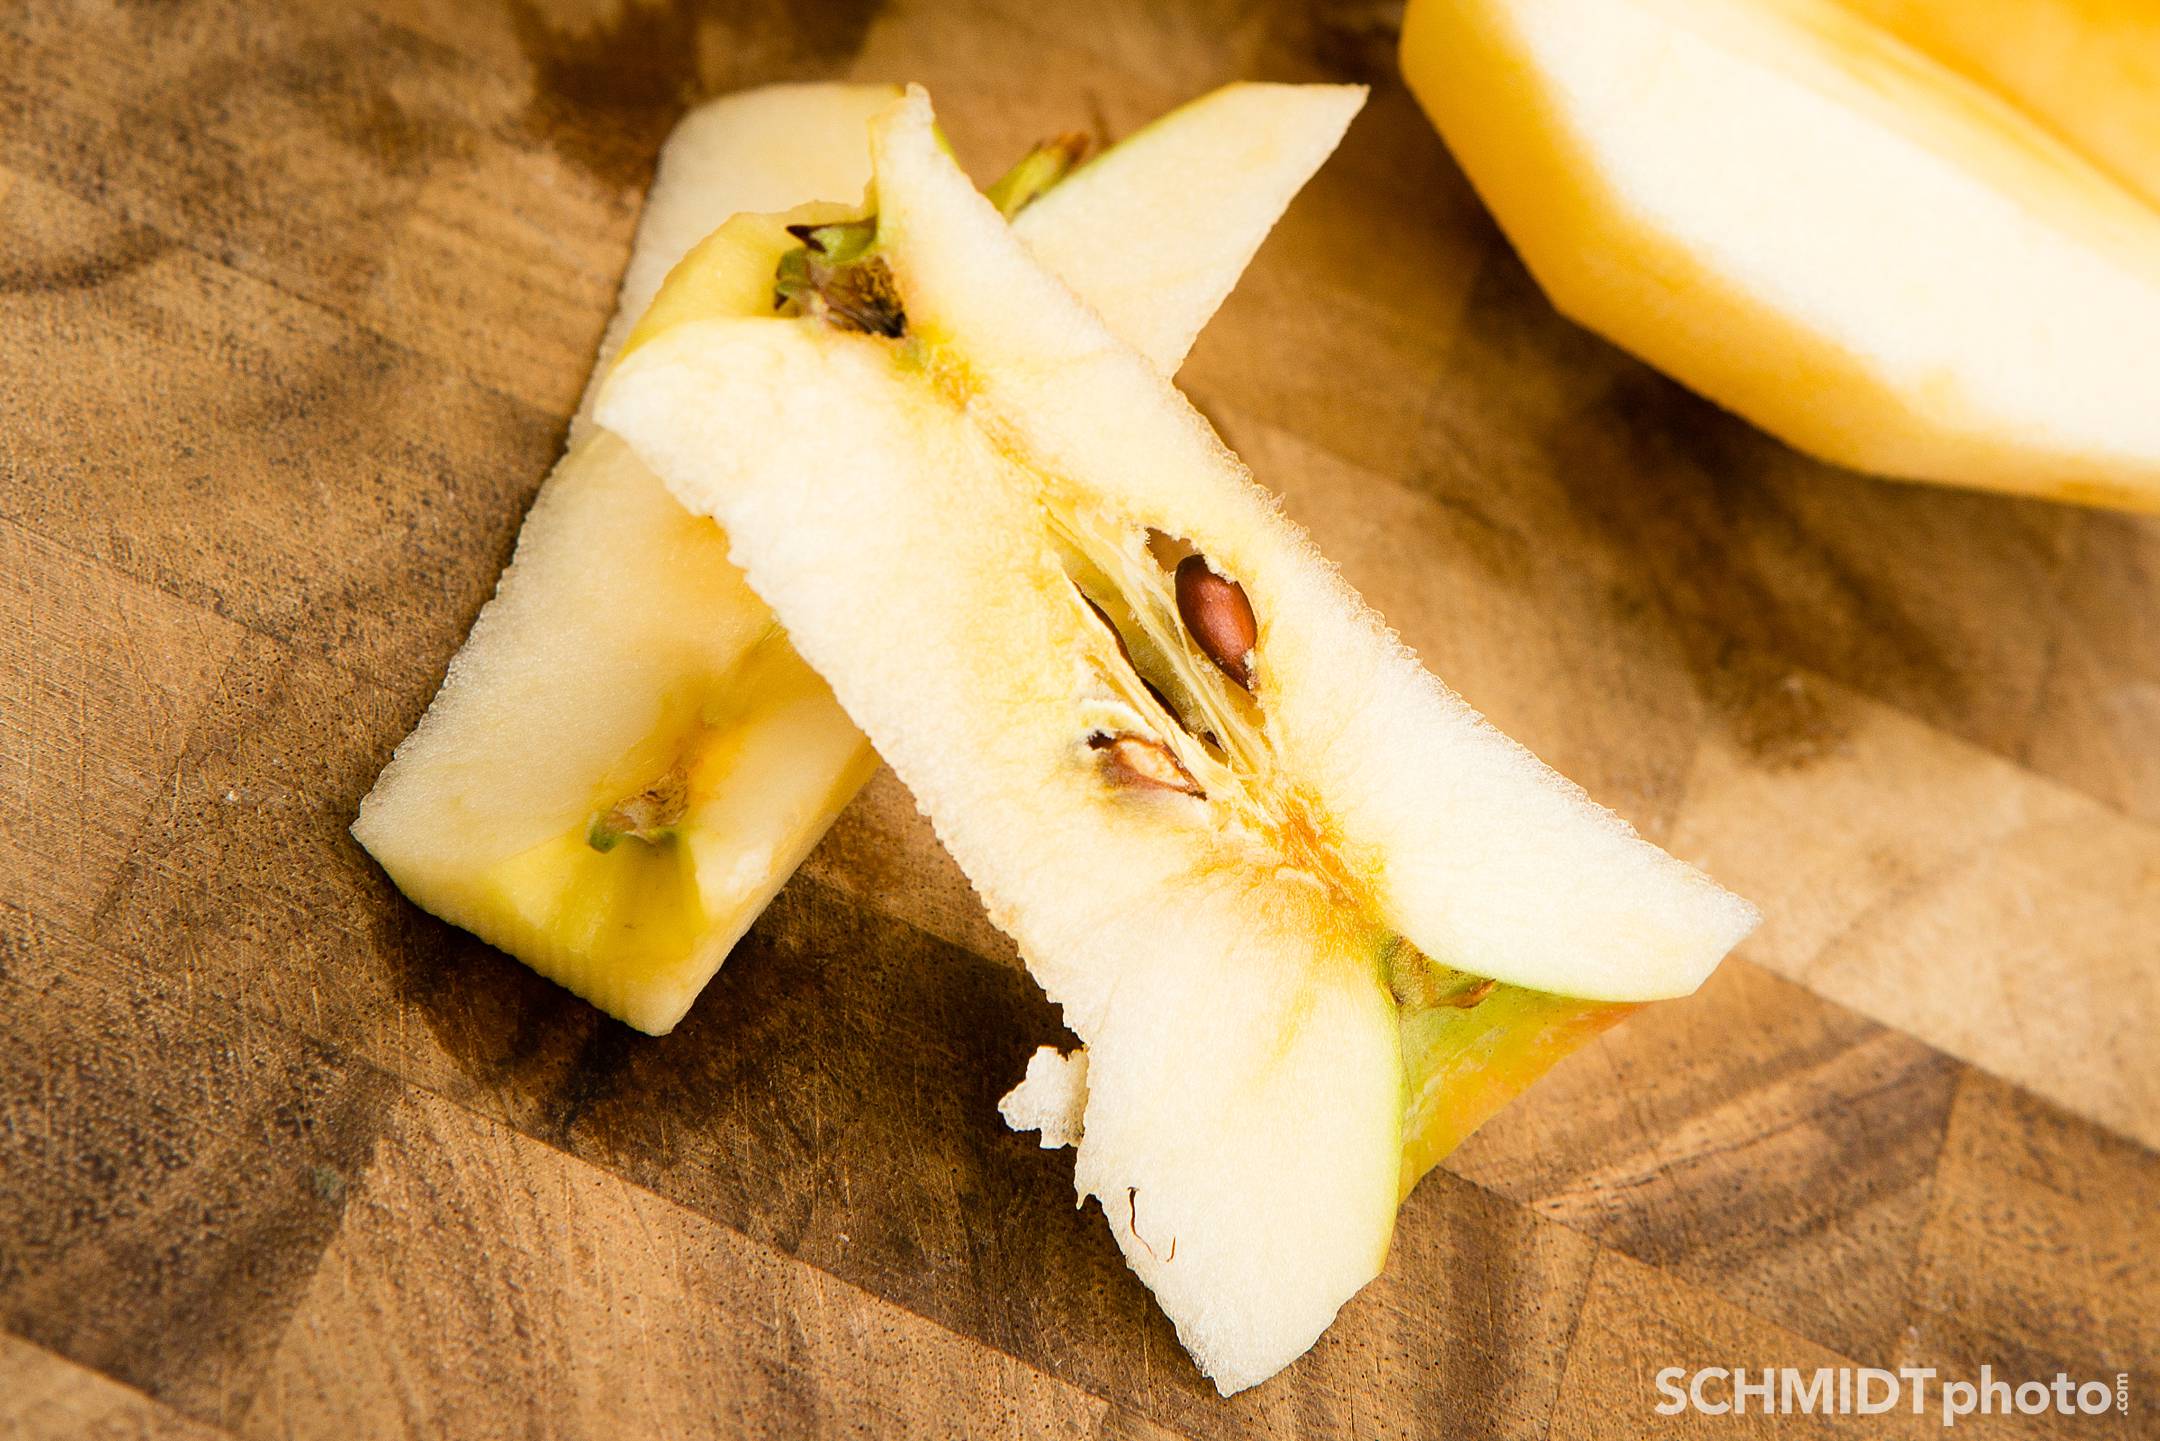 How to core apples for cooking homemade applesauce